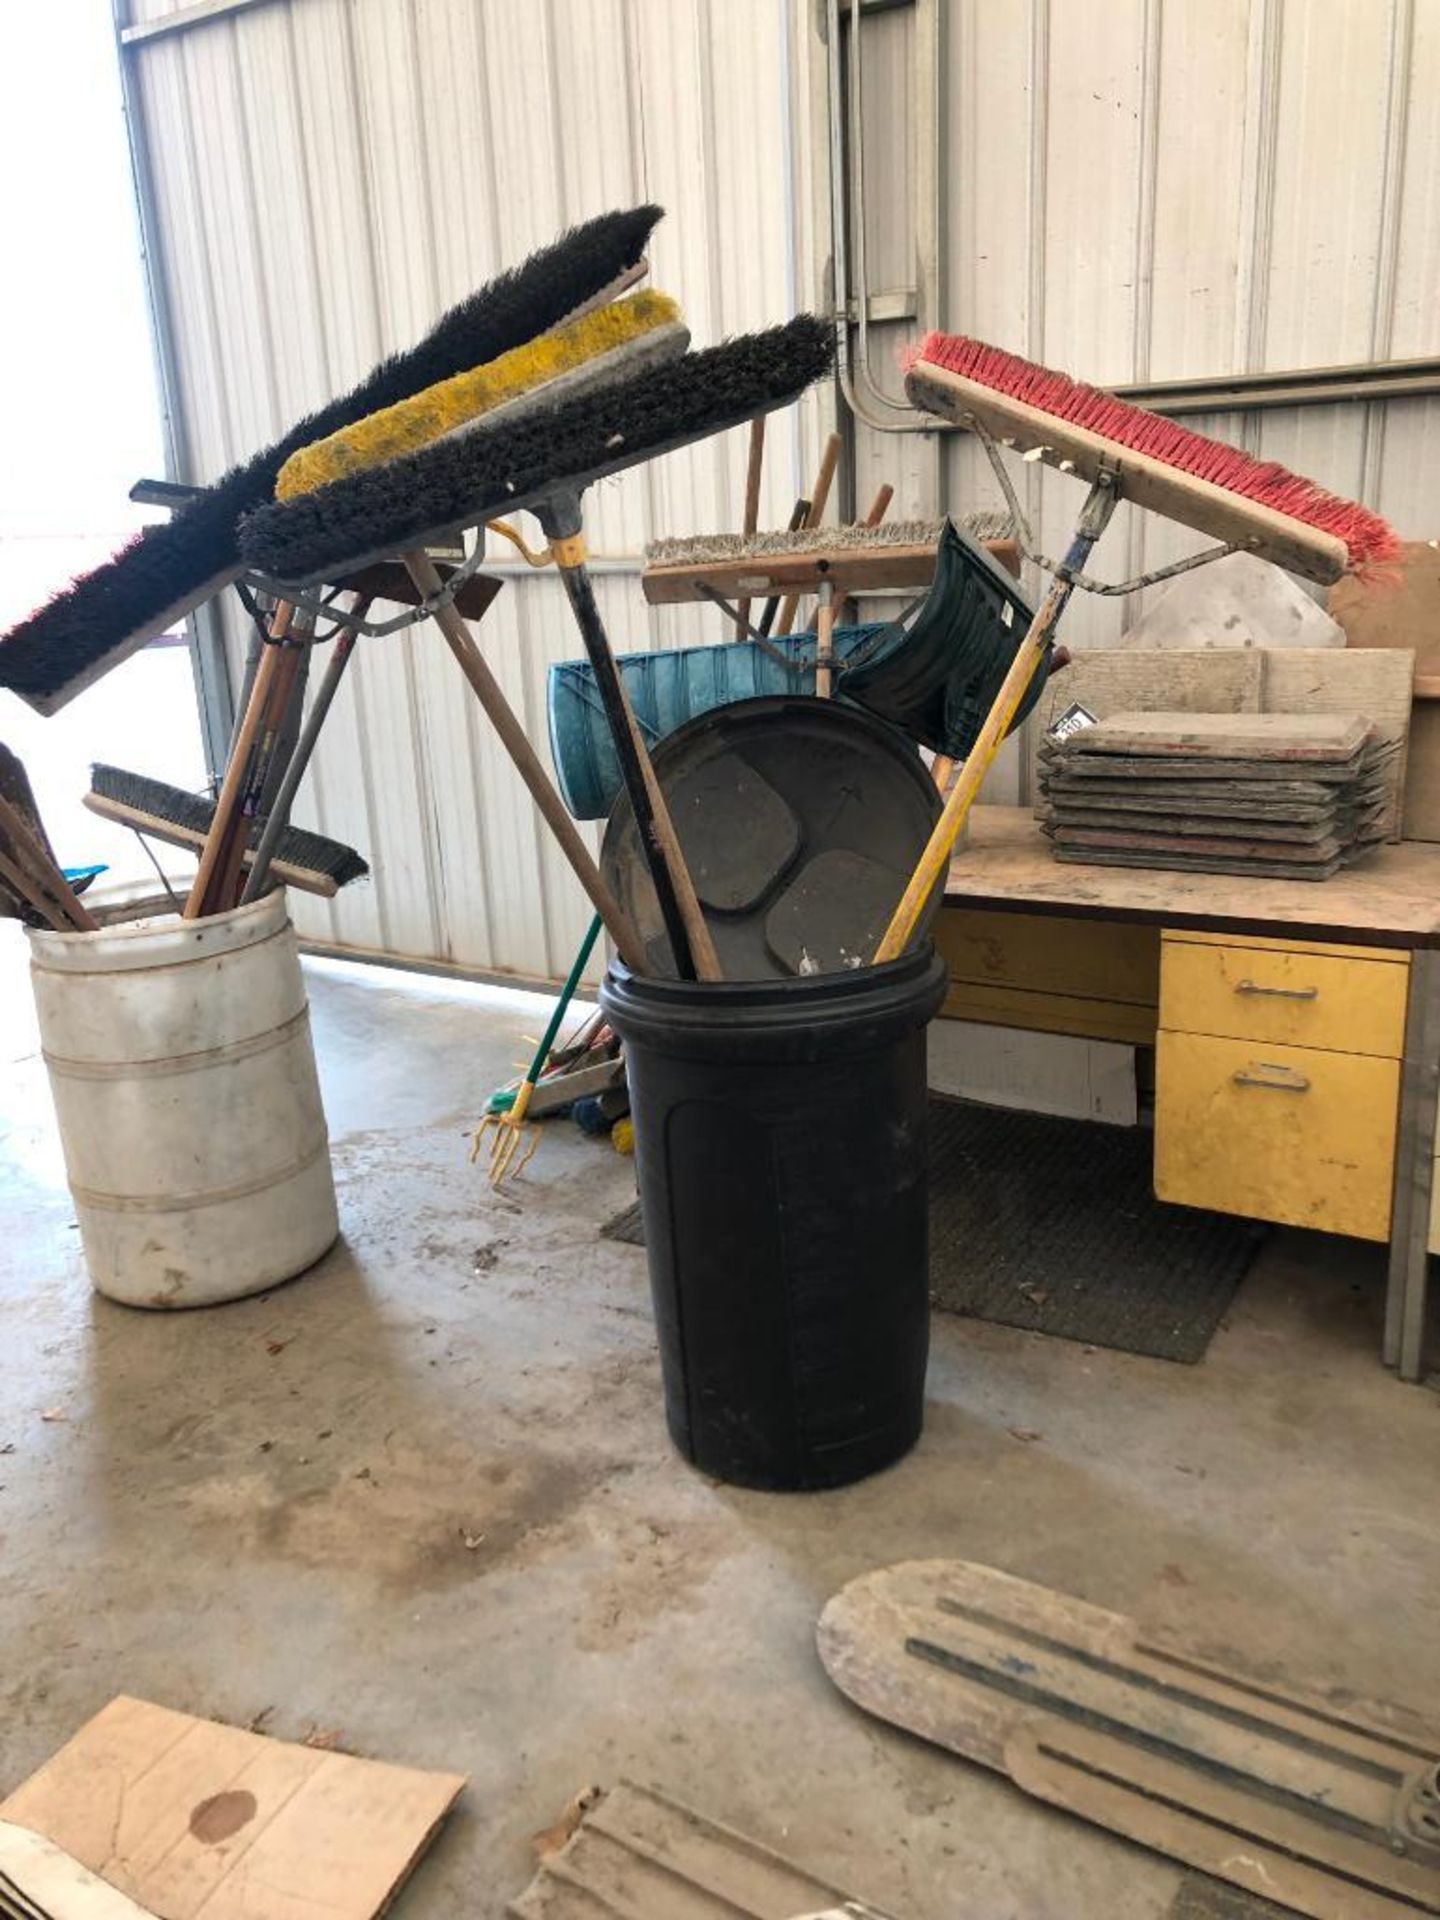 Waste Bin w/ Shovels and Brooms.